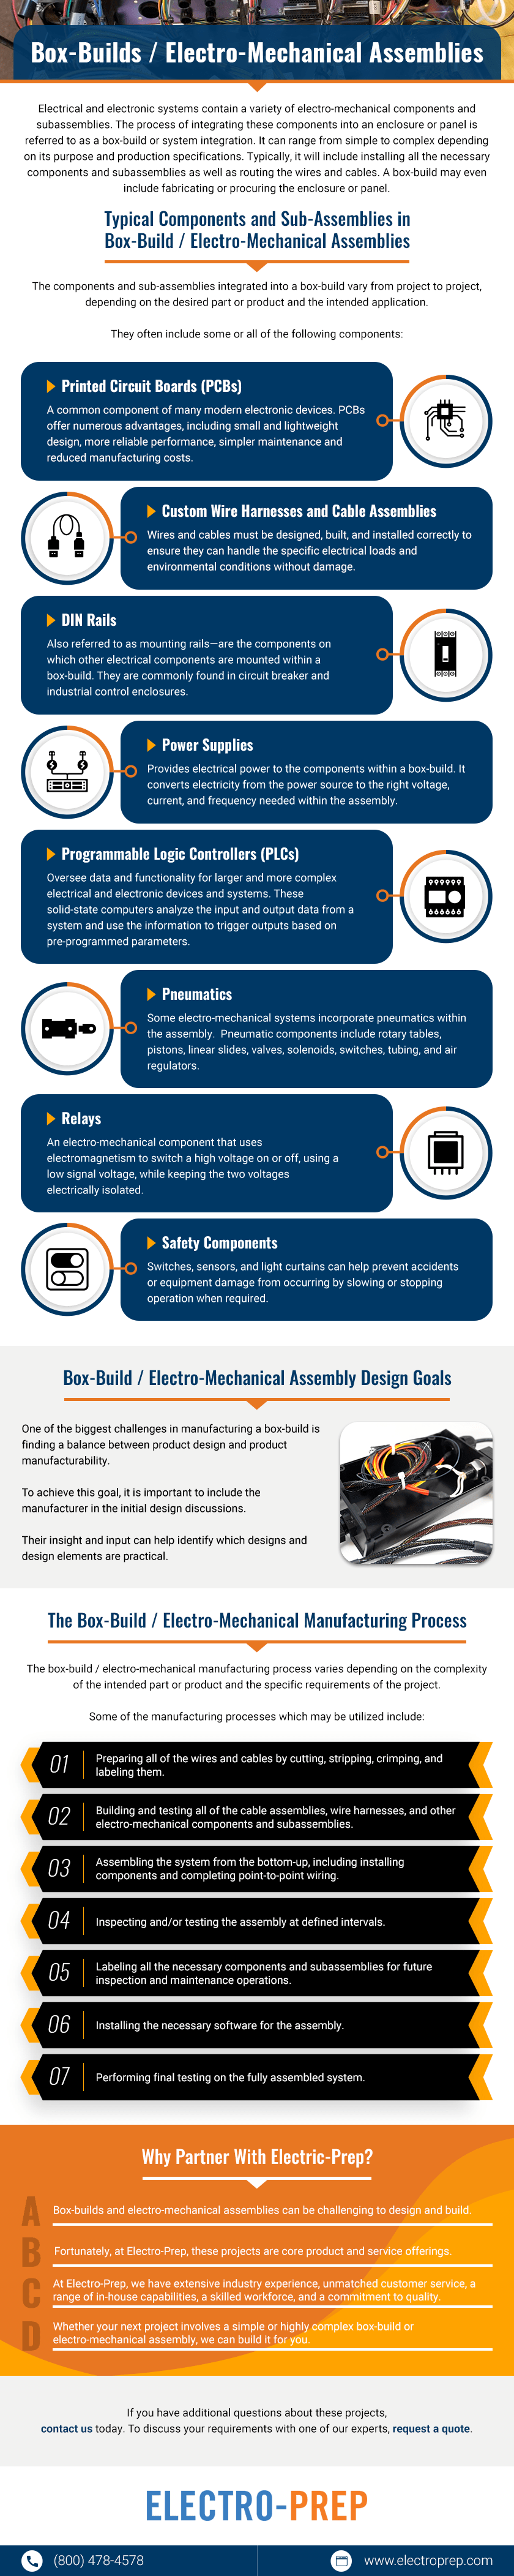 Typical Components and Sub-Assemblies in Box-Builds/Electro-Mechanical Assemblies